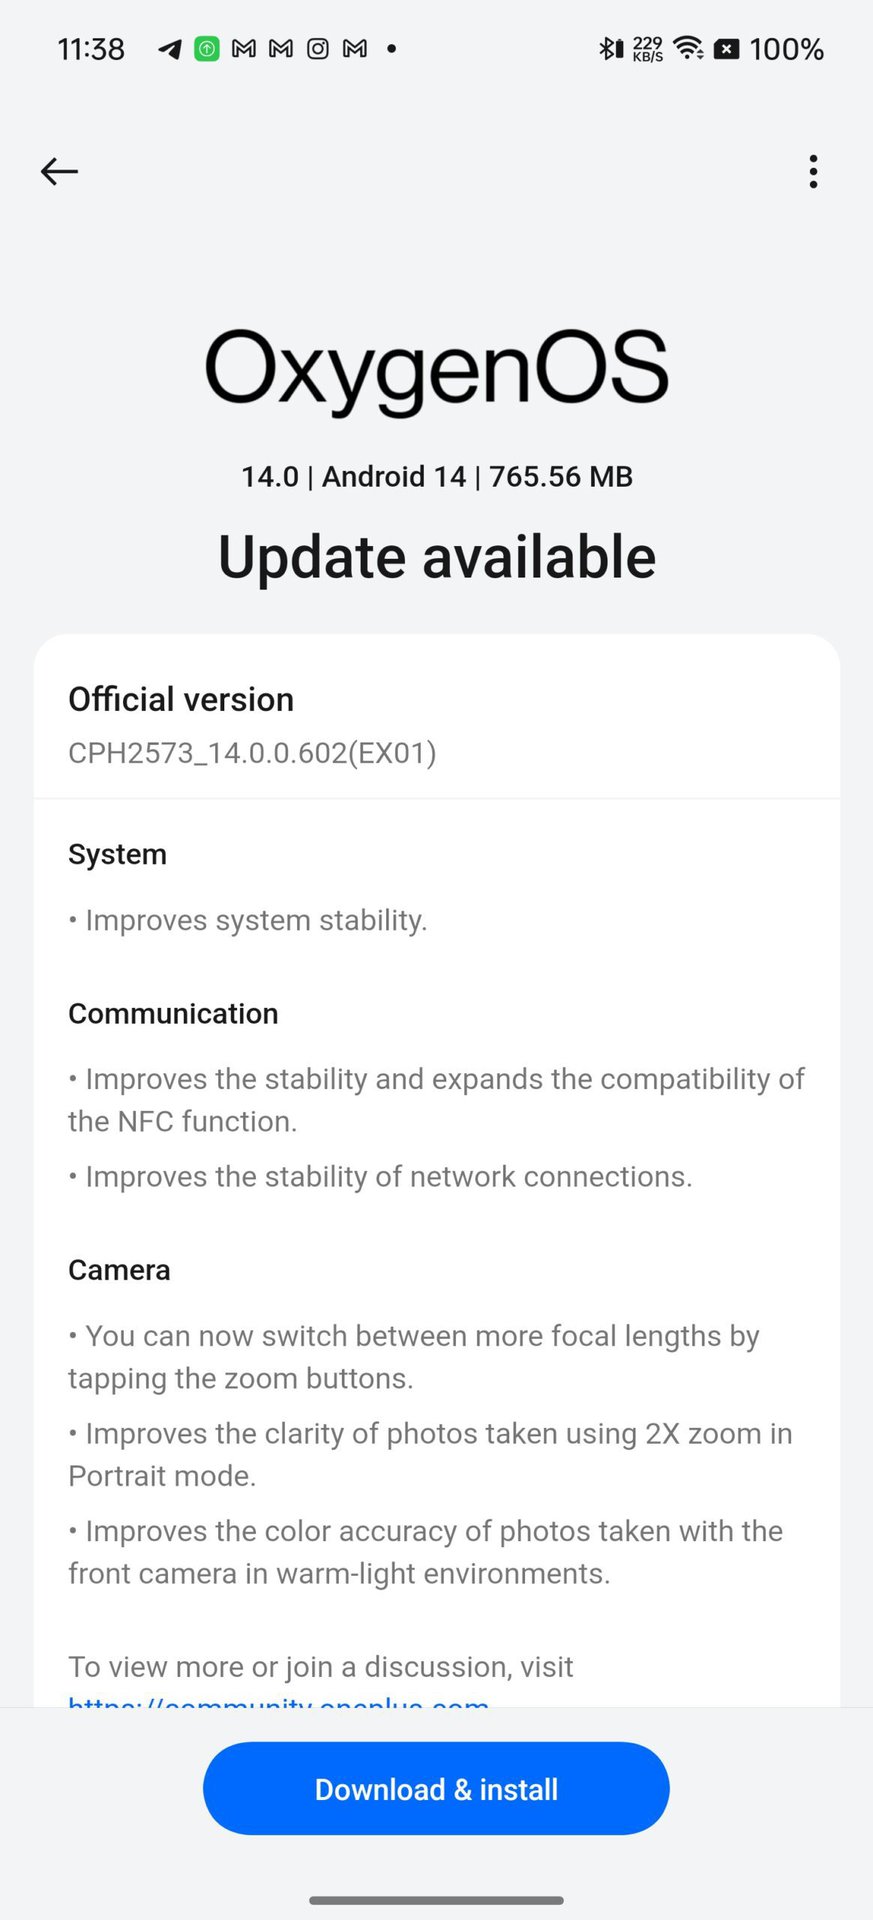 OnePlus OxygenOS 14.0.0.602 update screenshot showing new system, communication and camera improvements.